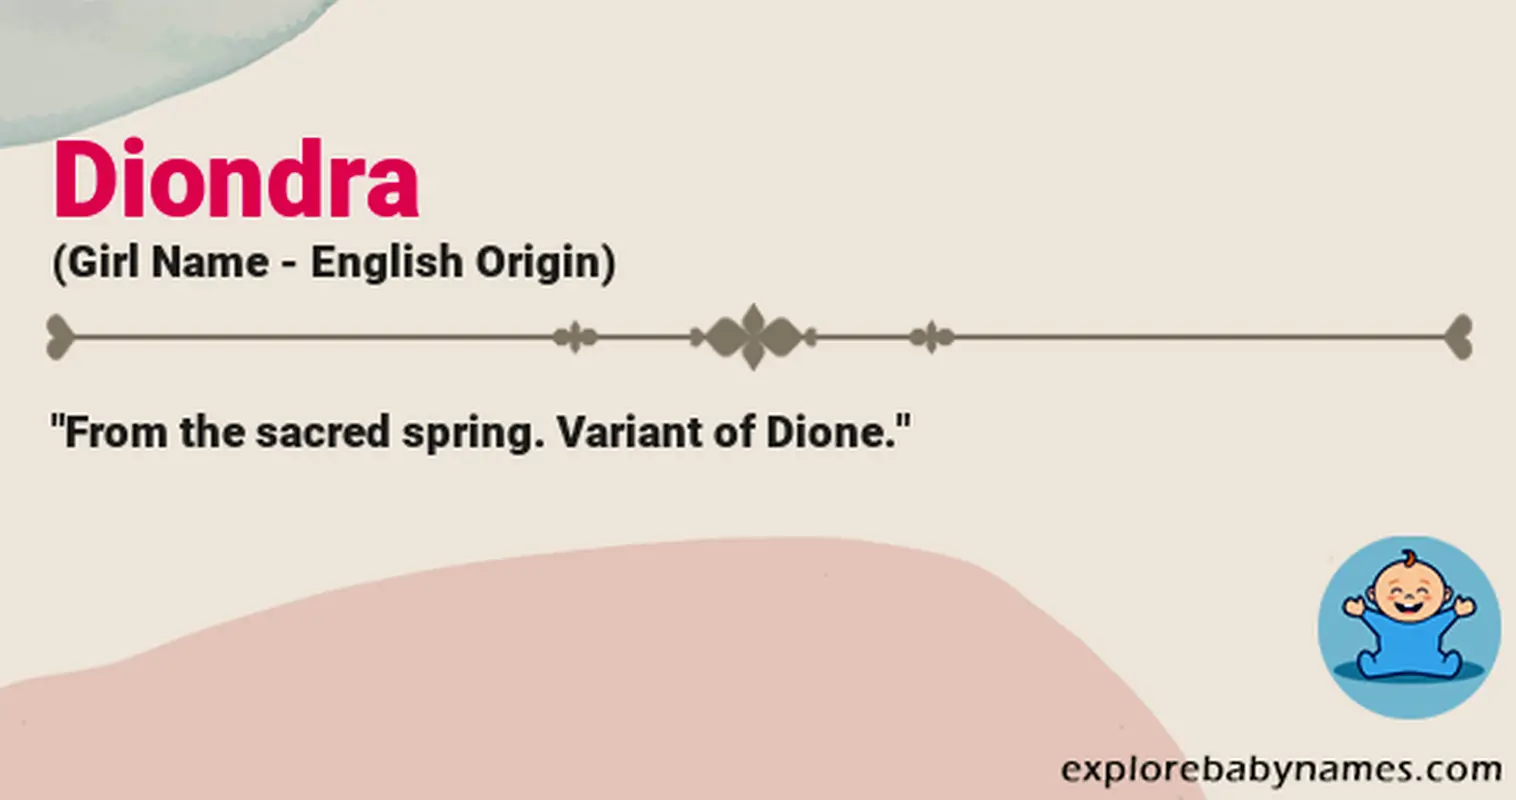 Meaning of Diondra